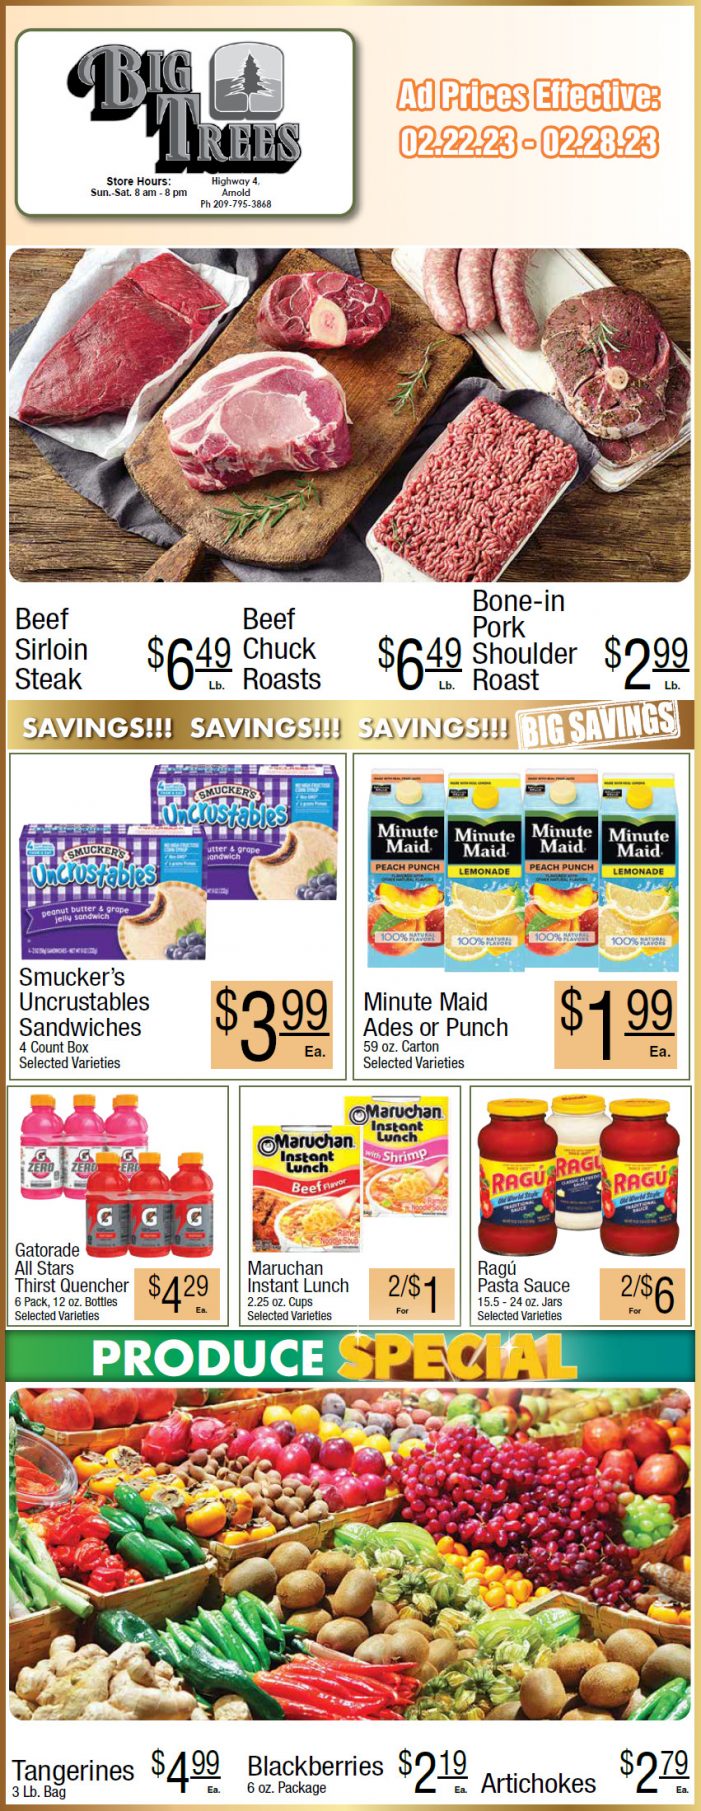 Big Trees Market Weekly Ad & Grocery Specials February 22 – 28th!  Shop Local & Save!!